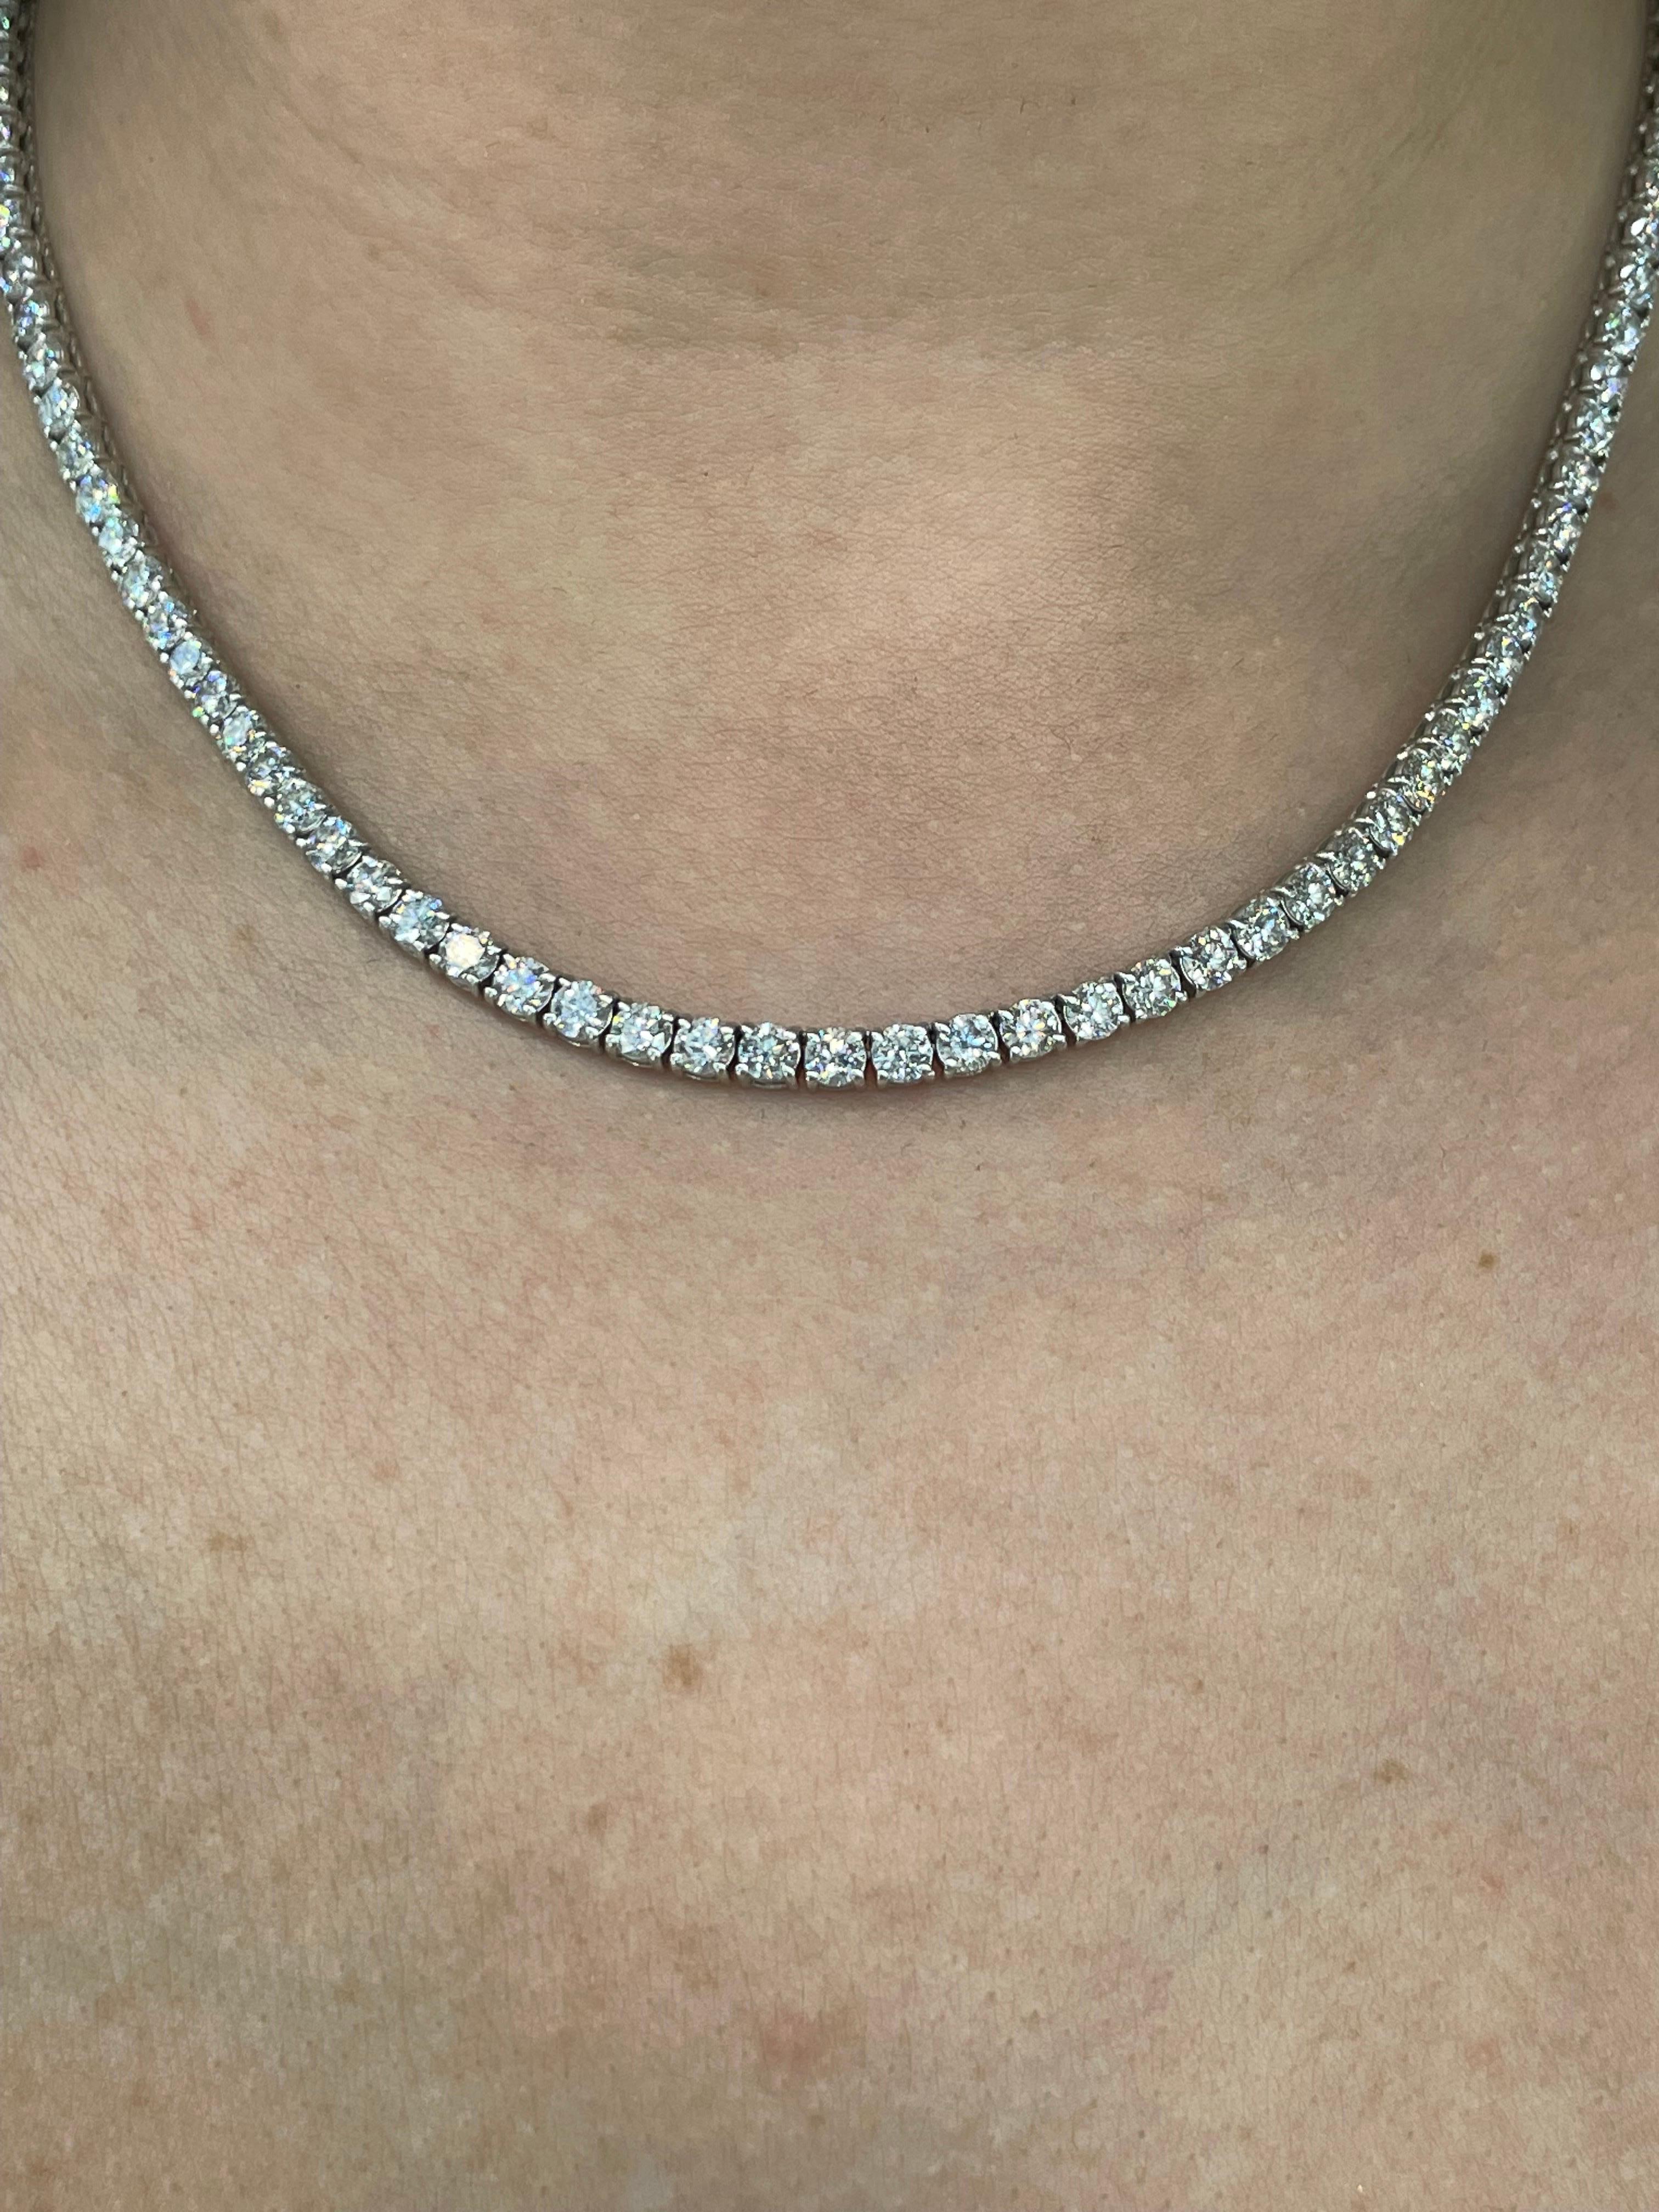 Diamonds Straight Line Necklace 17.25 Carats 14k White Gold 0.15 PTS For Sale 6